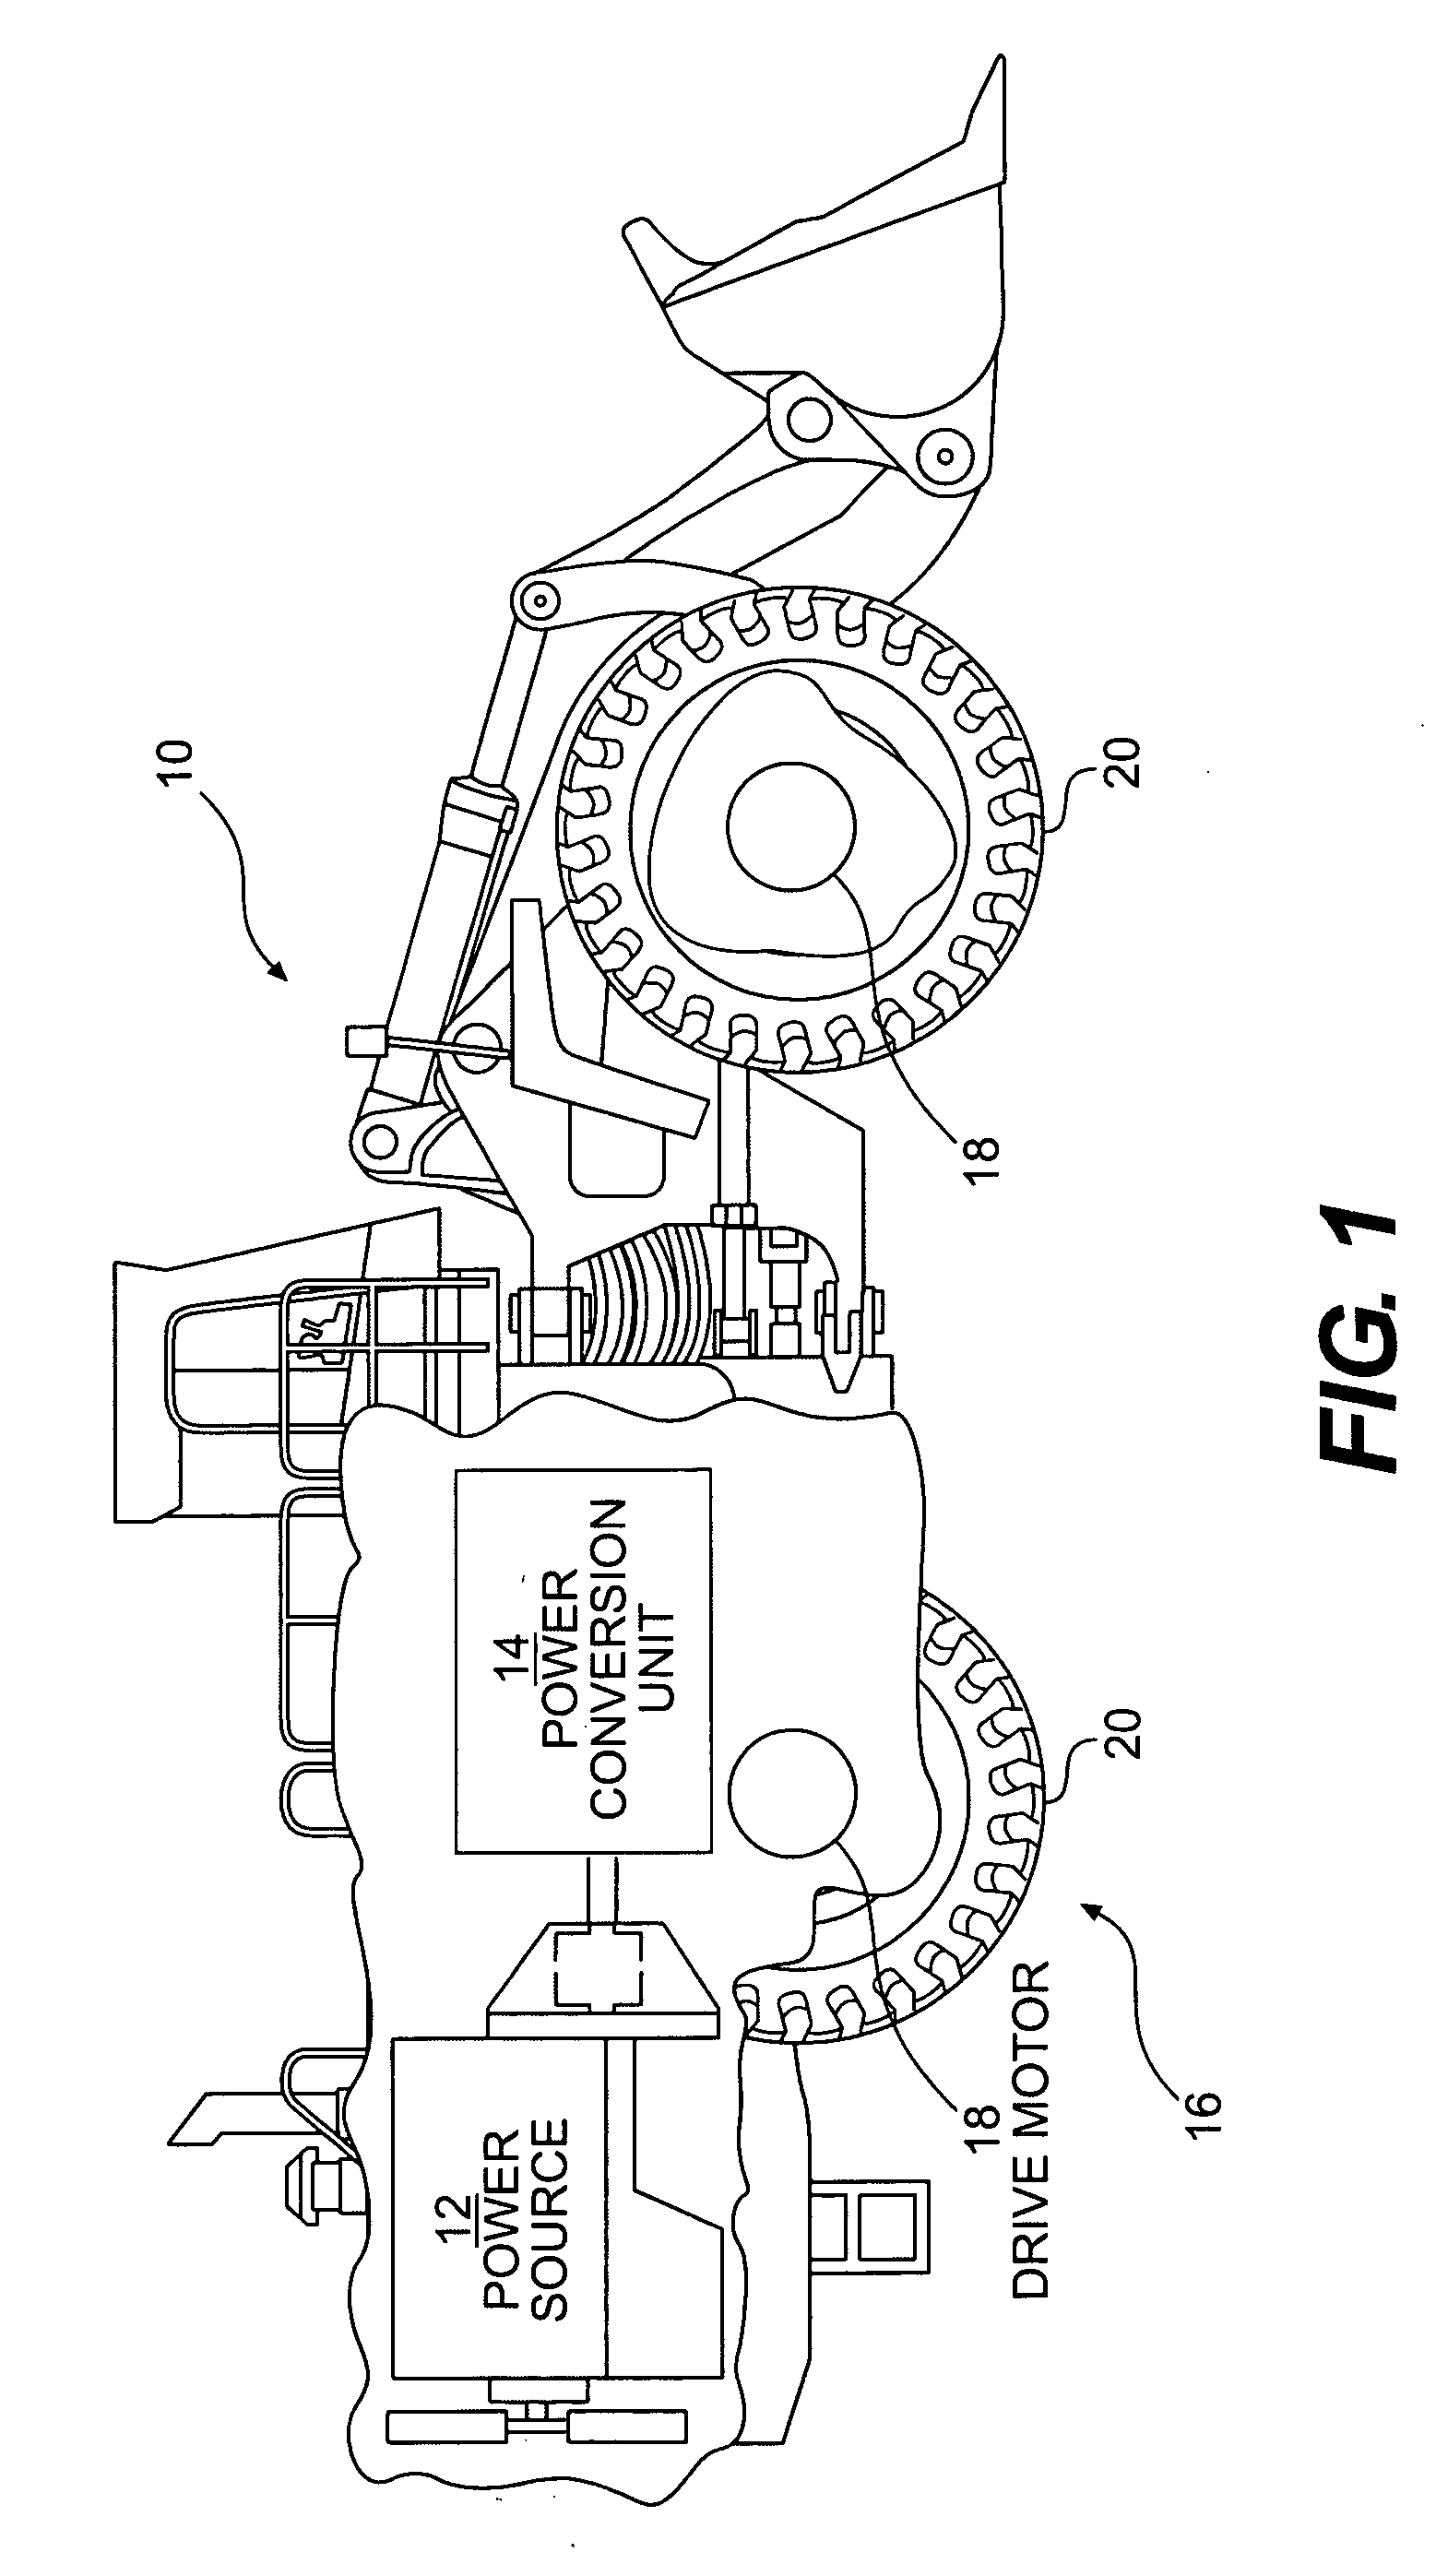 Multi-motor drive system for a work machine